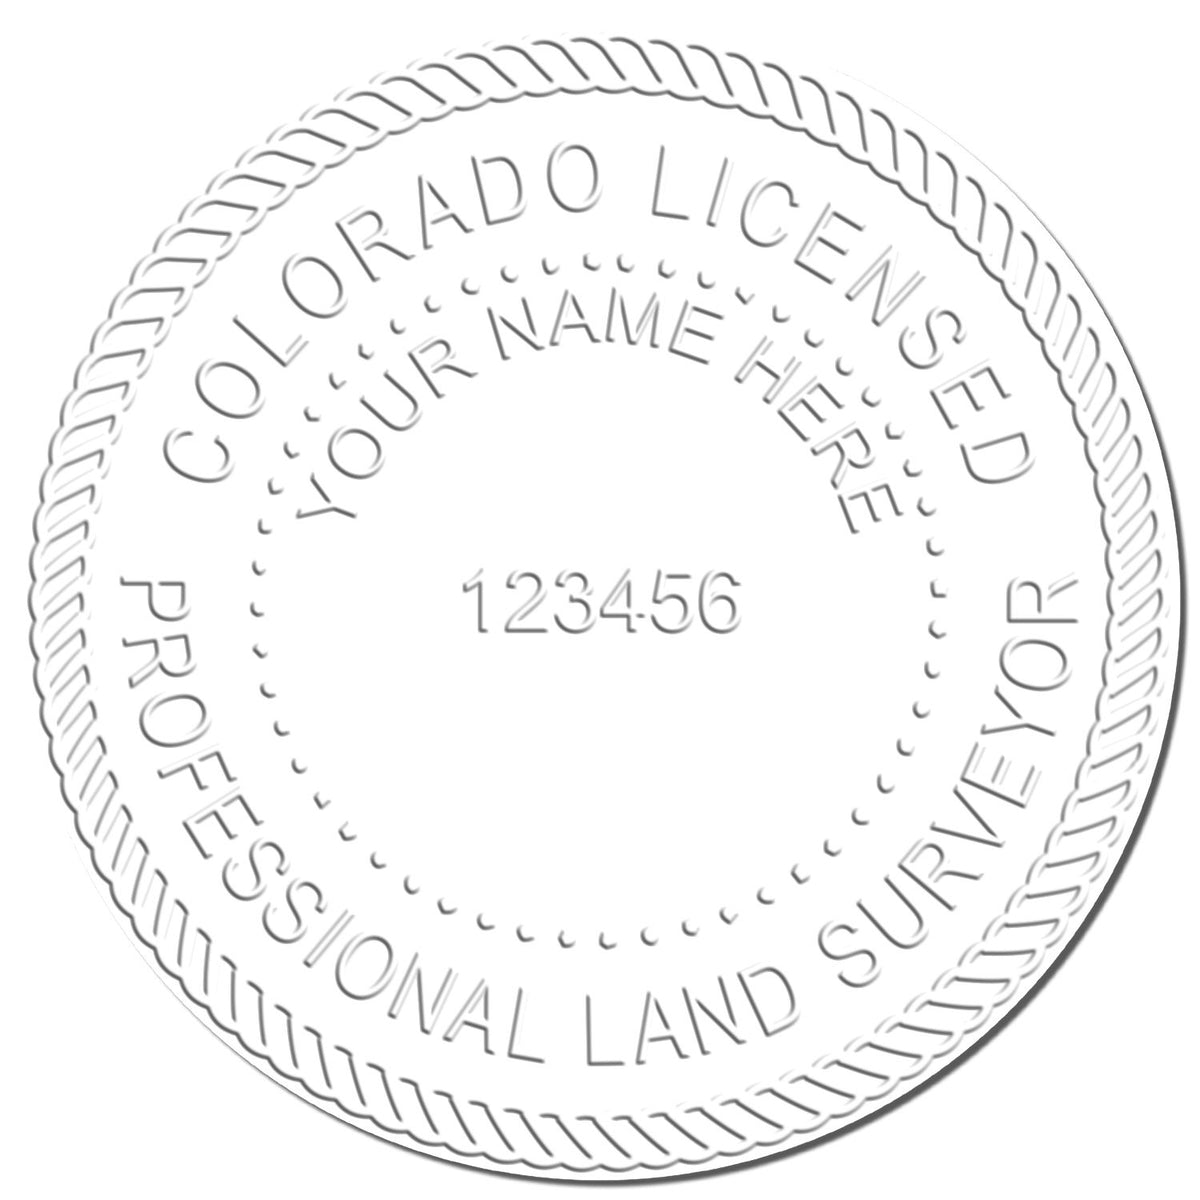 This paper is stamped with a sample imprint of the Handheld Colorado Land Surveyor Seal, signifying its quality and reliability.